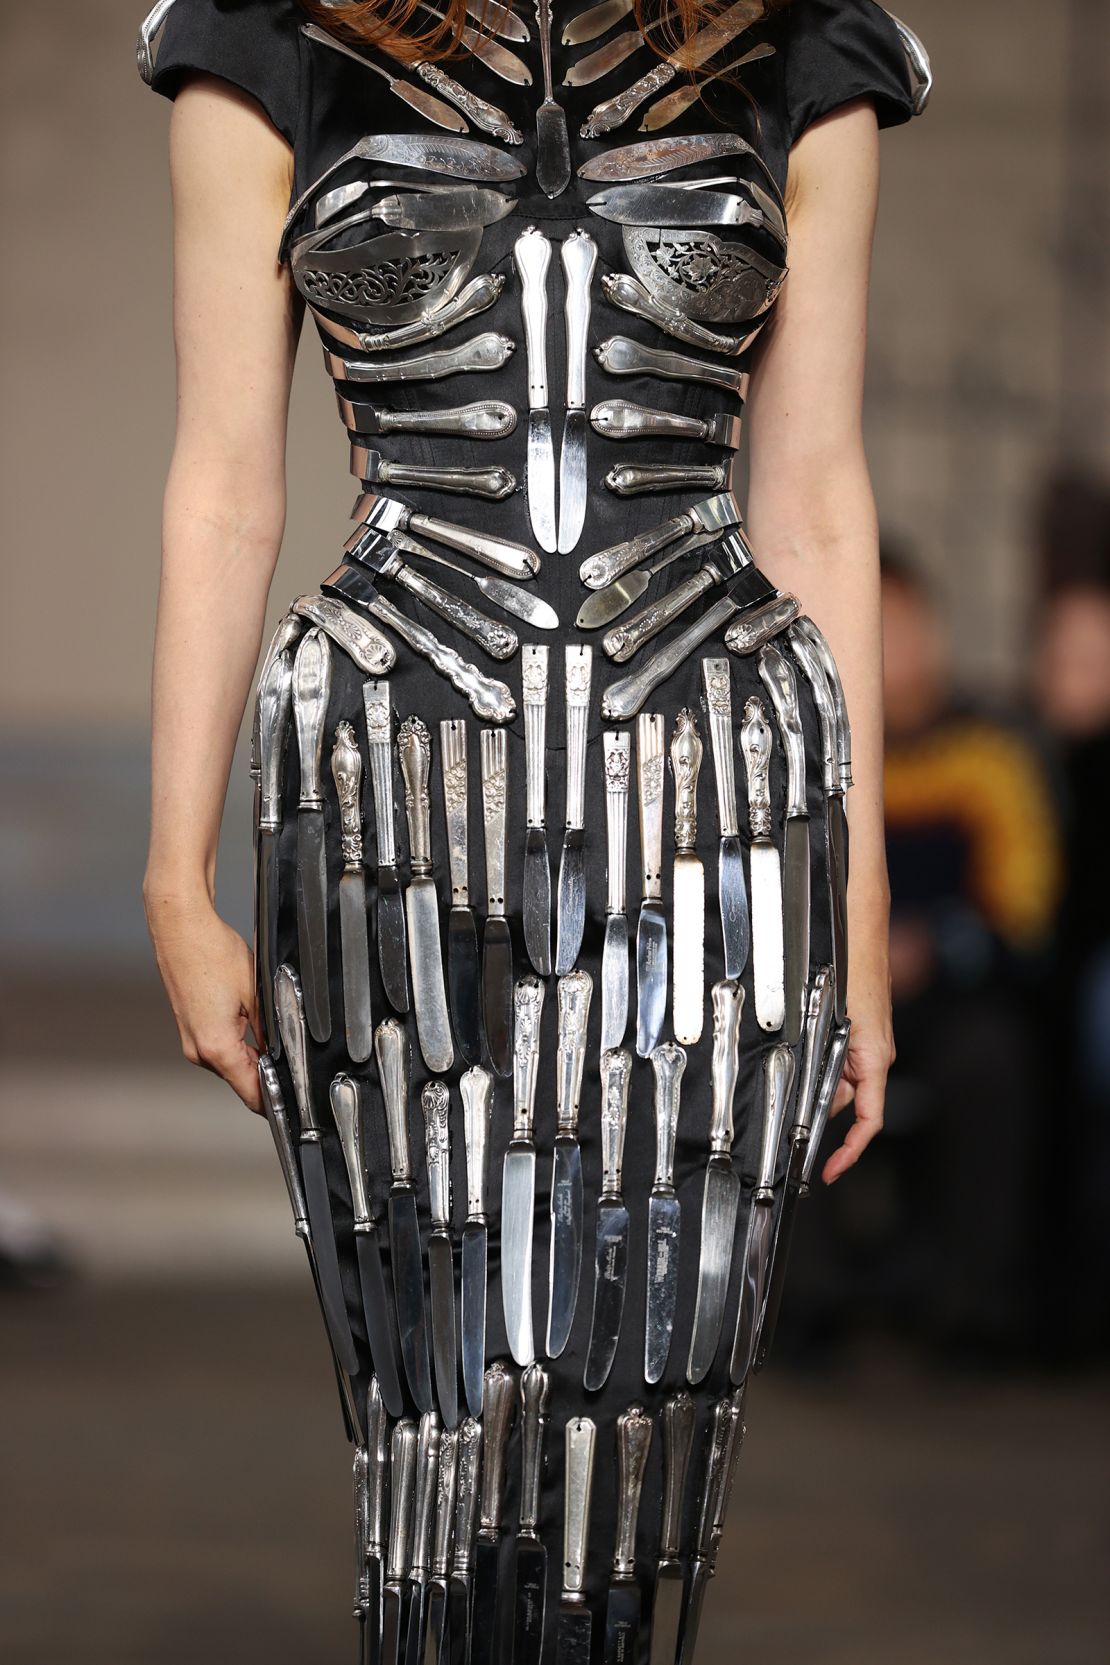 A dress by Dilara Findikoglu embellished with vintage silver knives molded perfectly to the body.